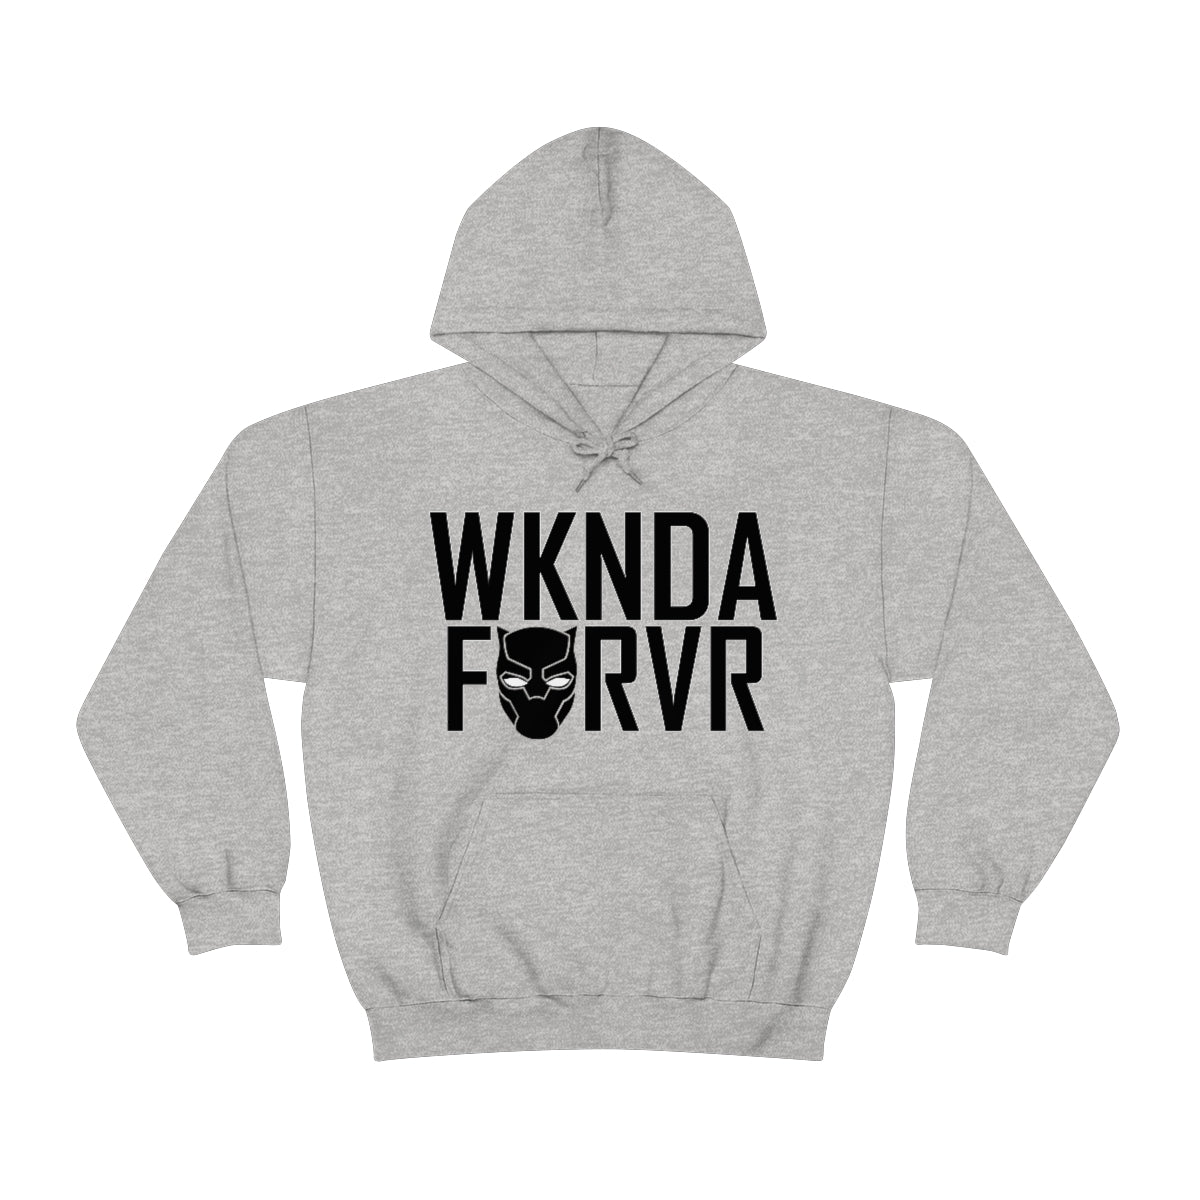 "WKNDA FRVR" Hoodie (Available in White & Gray)